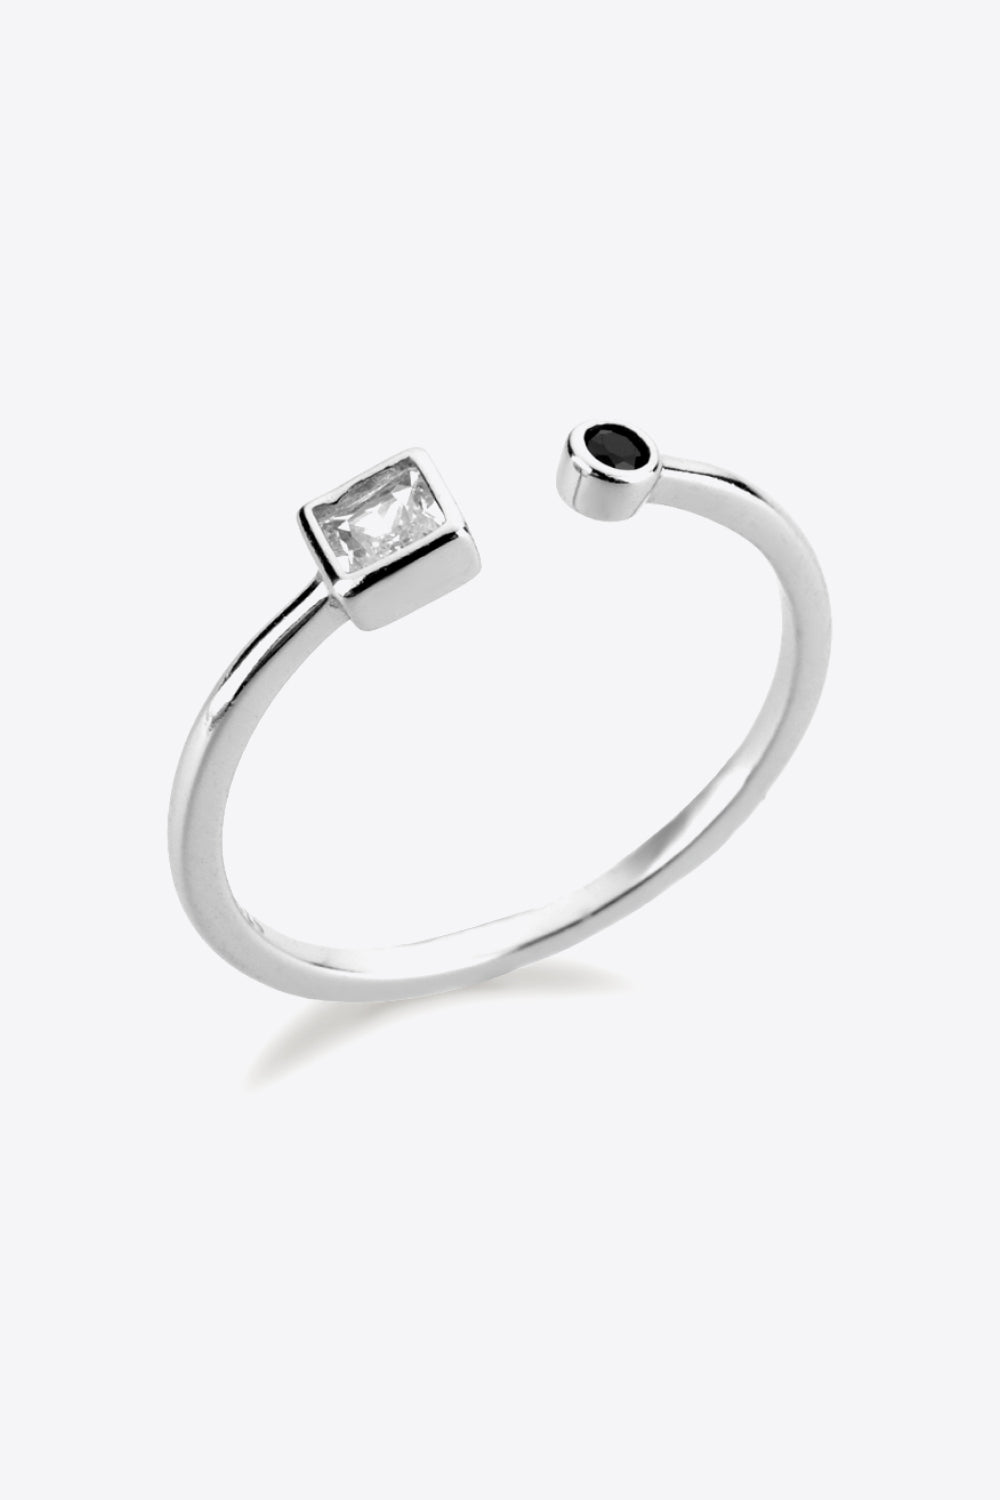 Opposites Attract Silver Open Ring